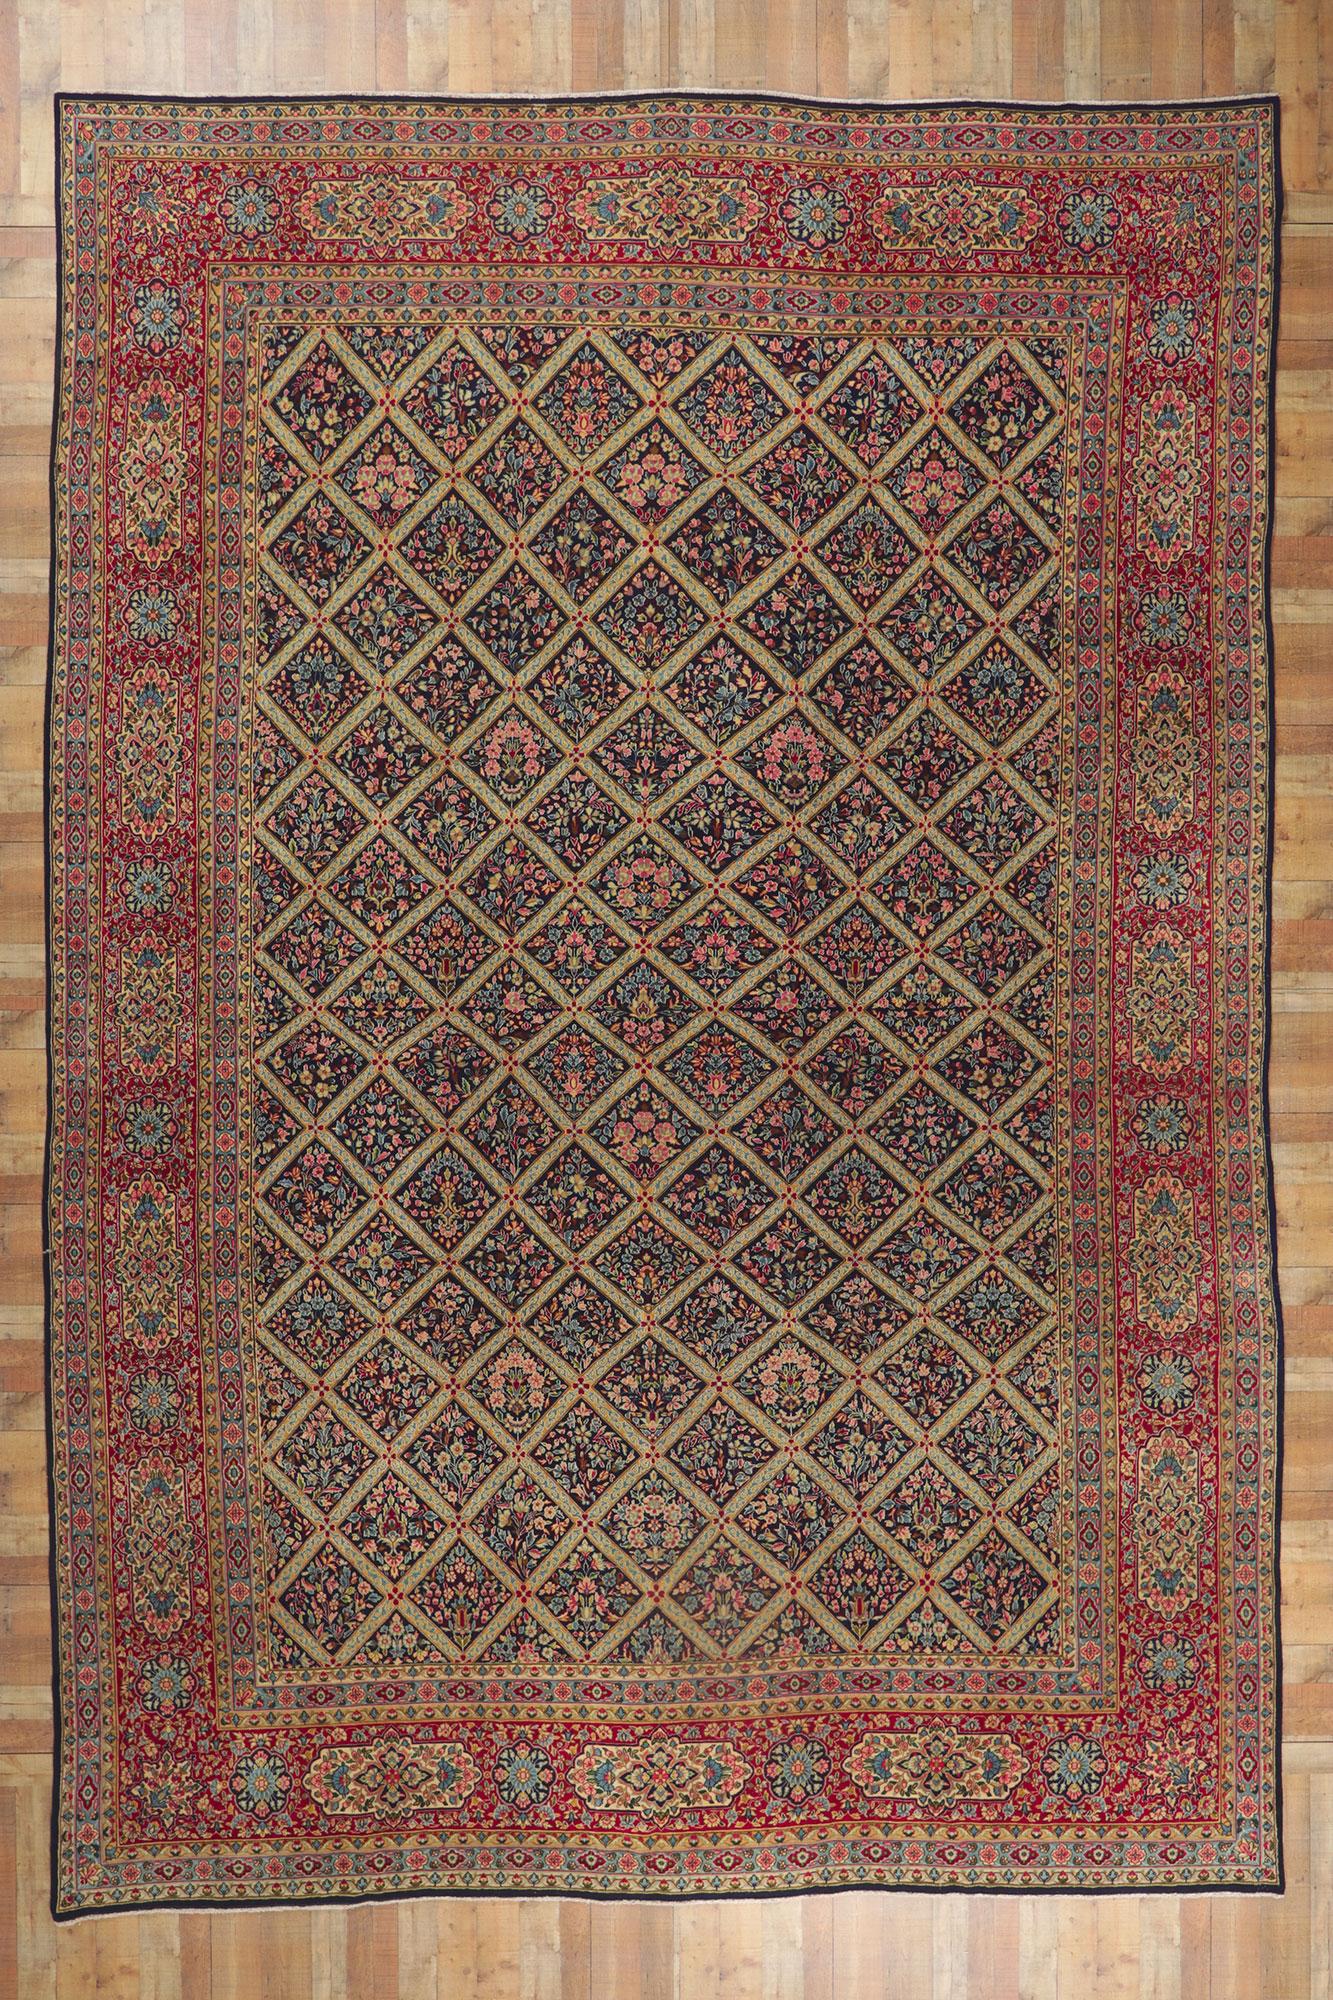 Oversized Antique Persian Kerman Rug Hotel Lobby Size Carpet In Good Condition For Sale In Dallas, TX